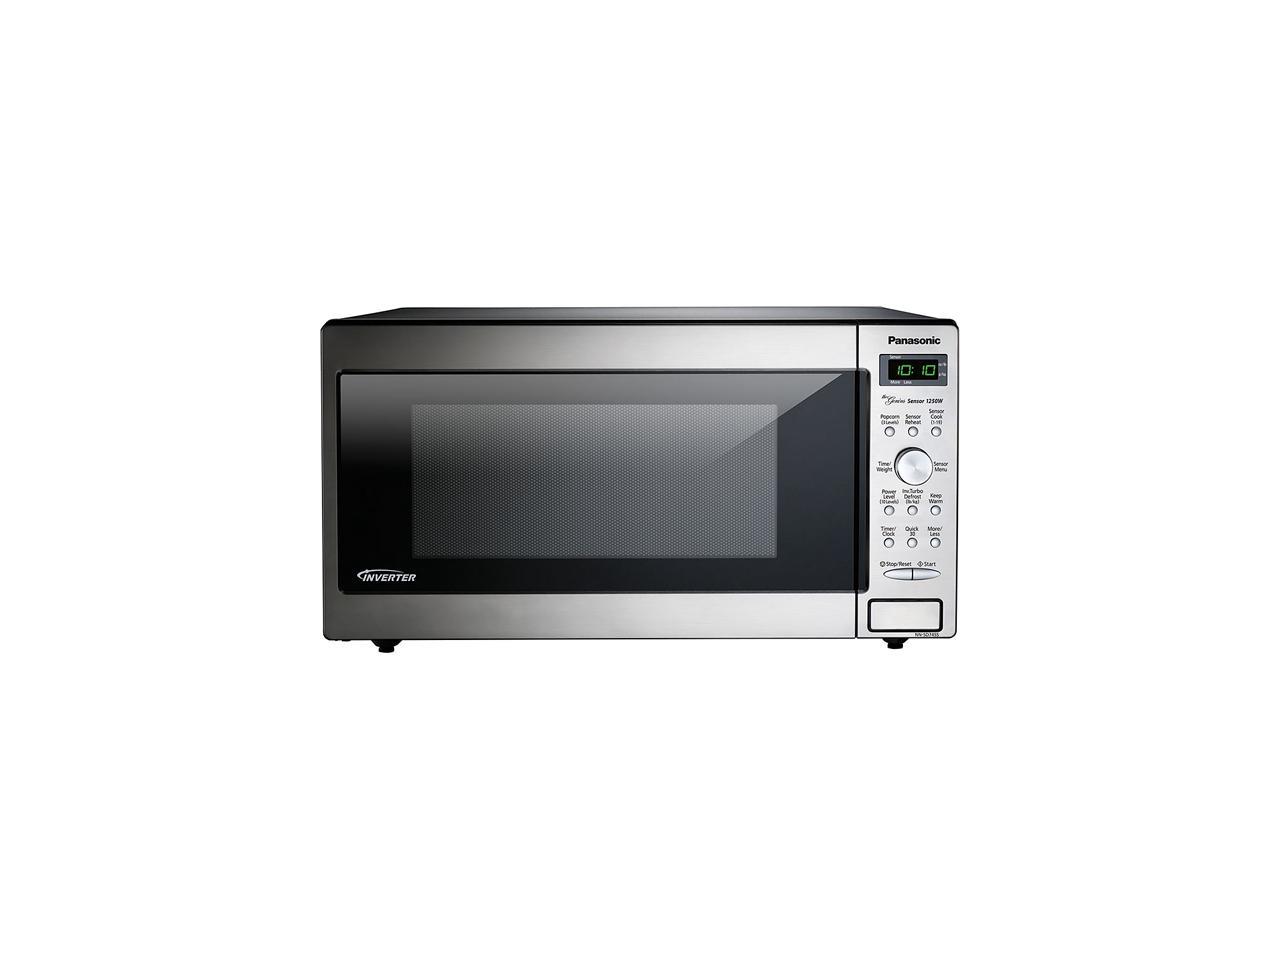 Panasonic 1.6 Cu. Ft. Built-In/Countertop Microwave Oven with Inverter